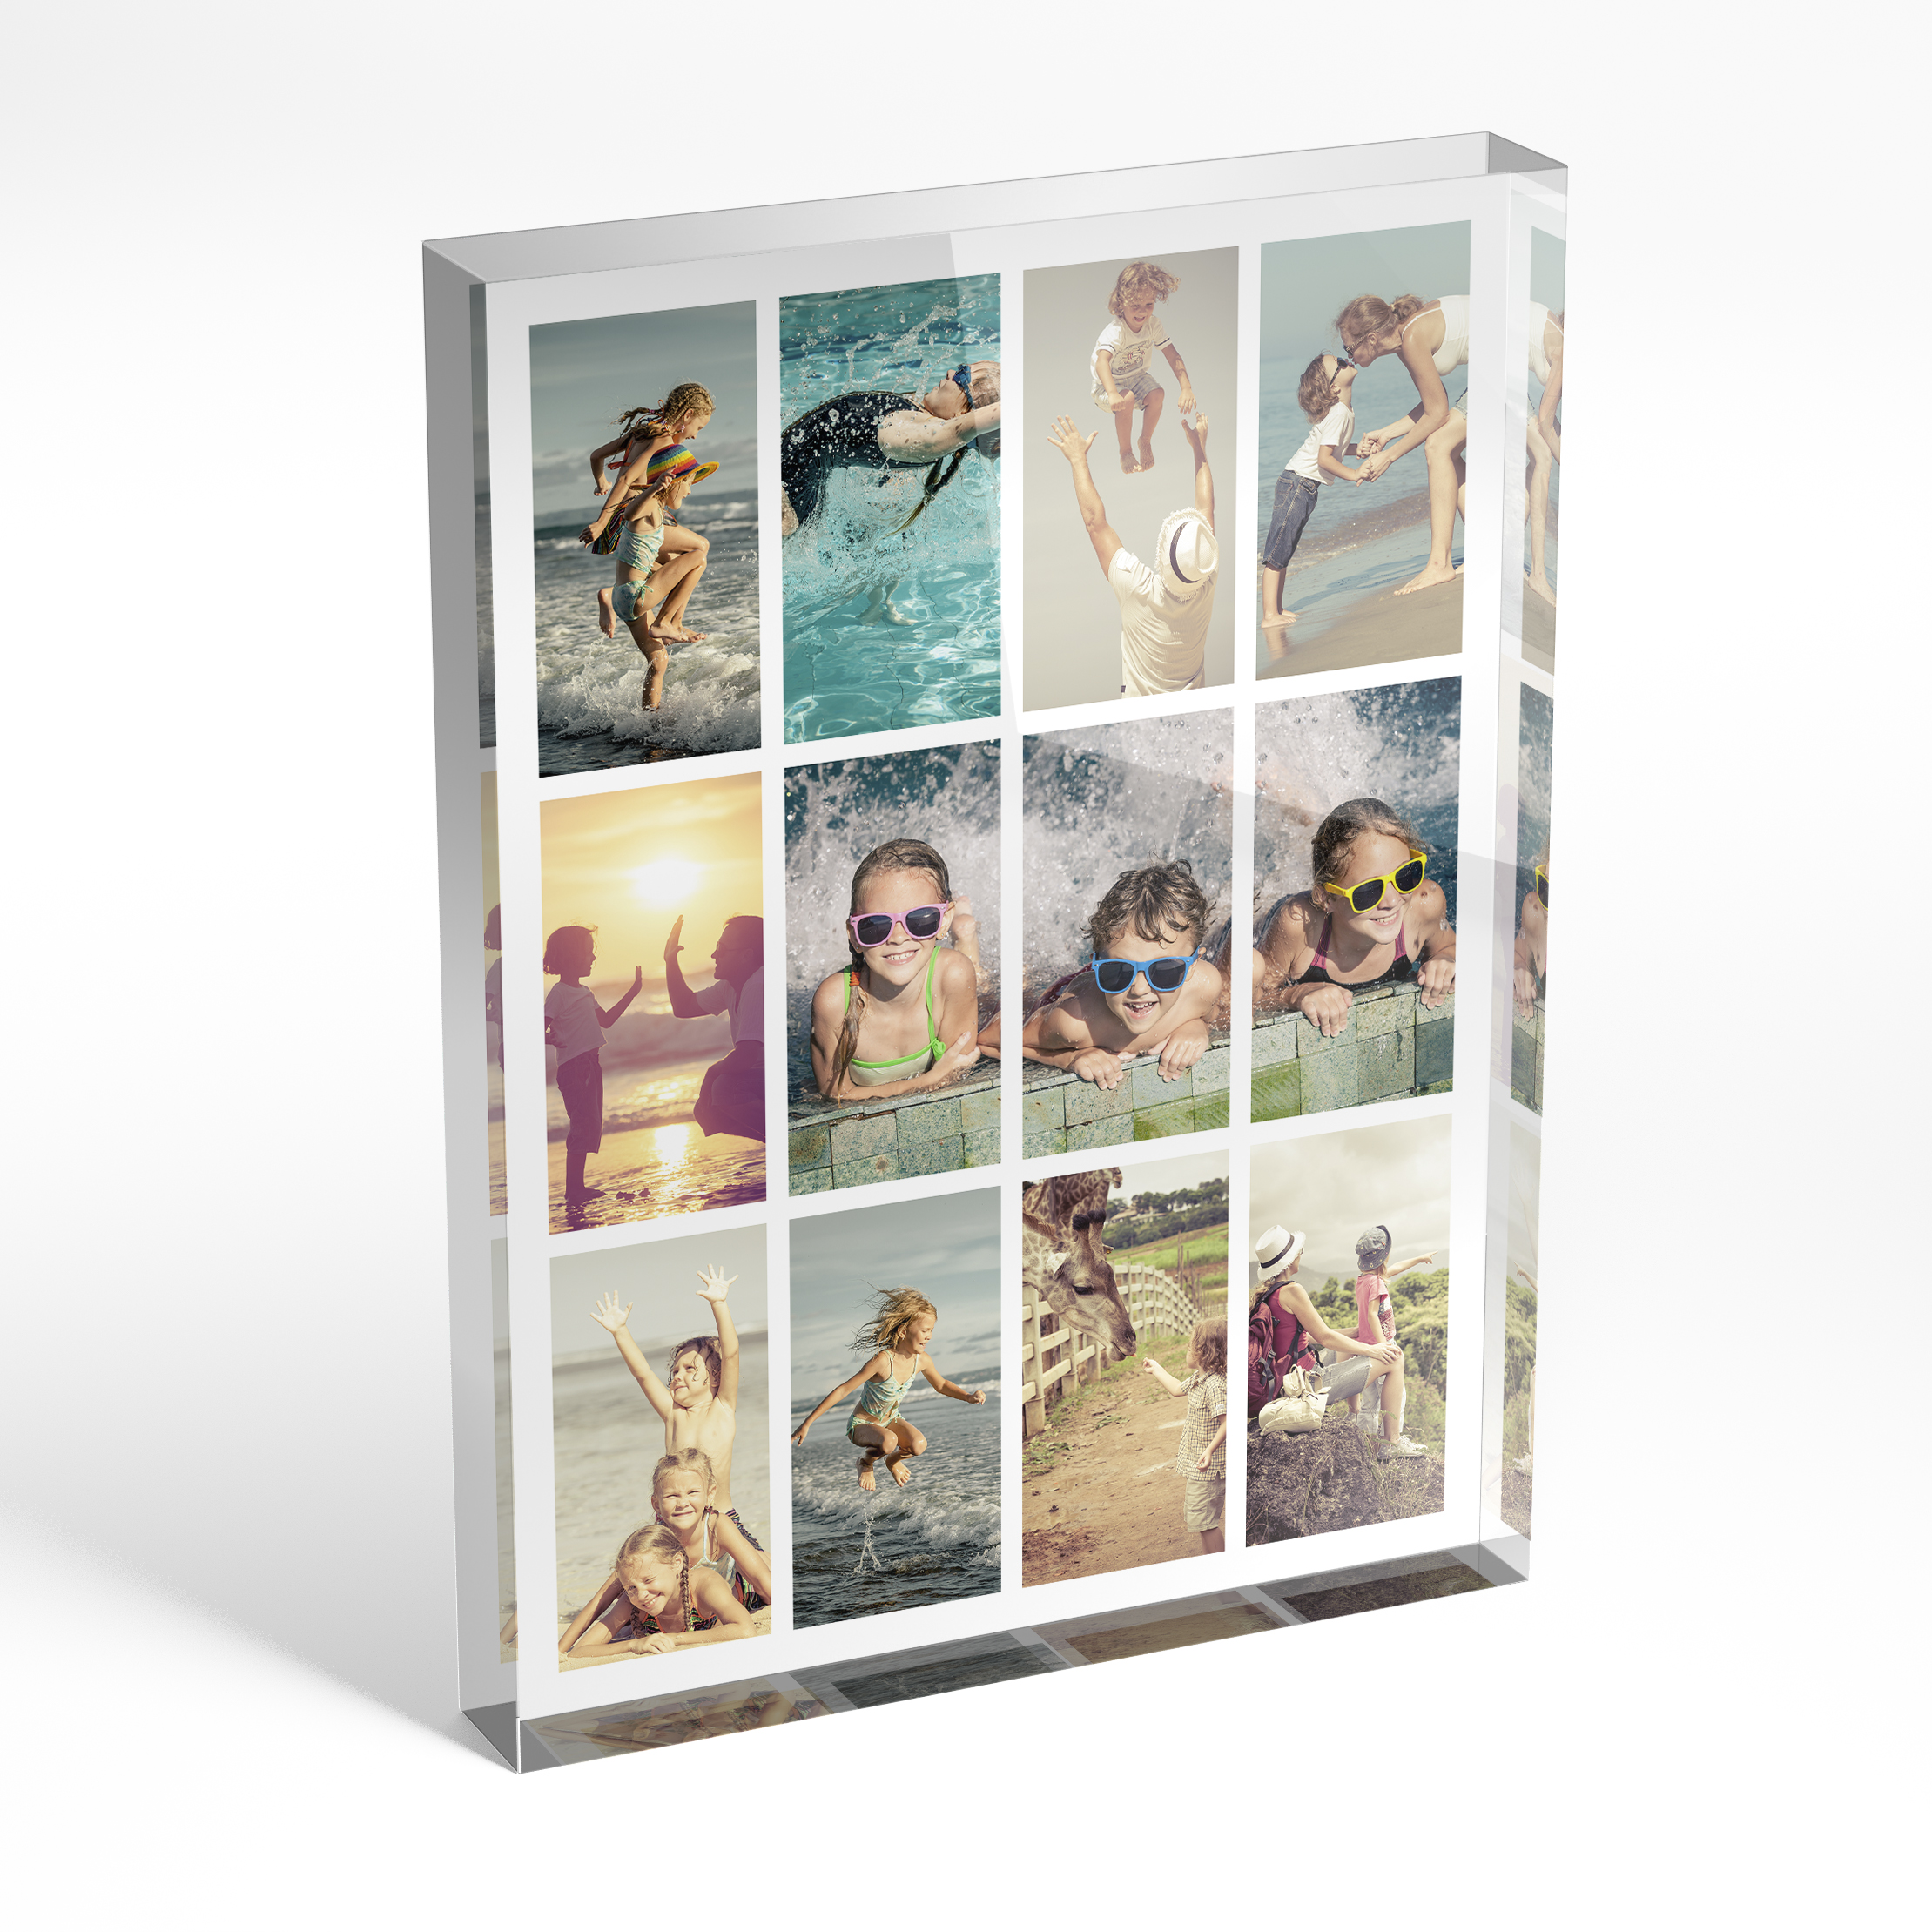 An angled side view of a portrait layout Acrylic Photo Block with space for 10+ photos. Thiis design is named "Cinematic Snapshot". 